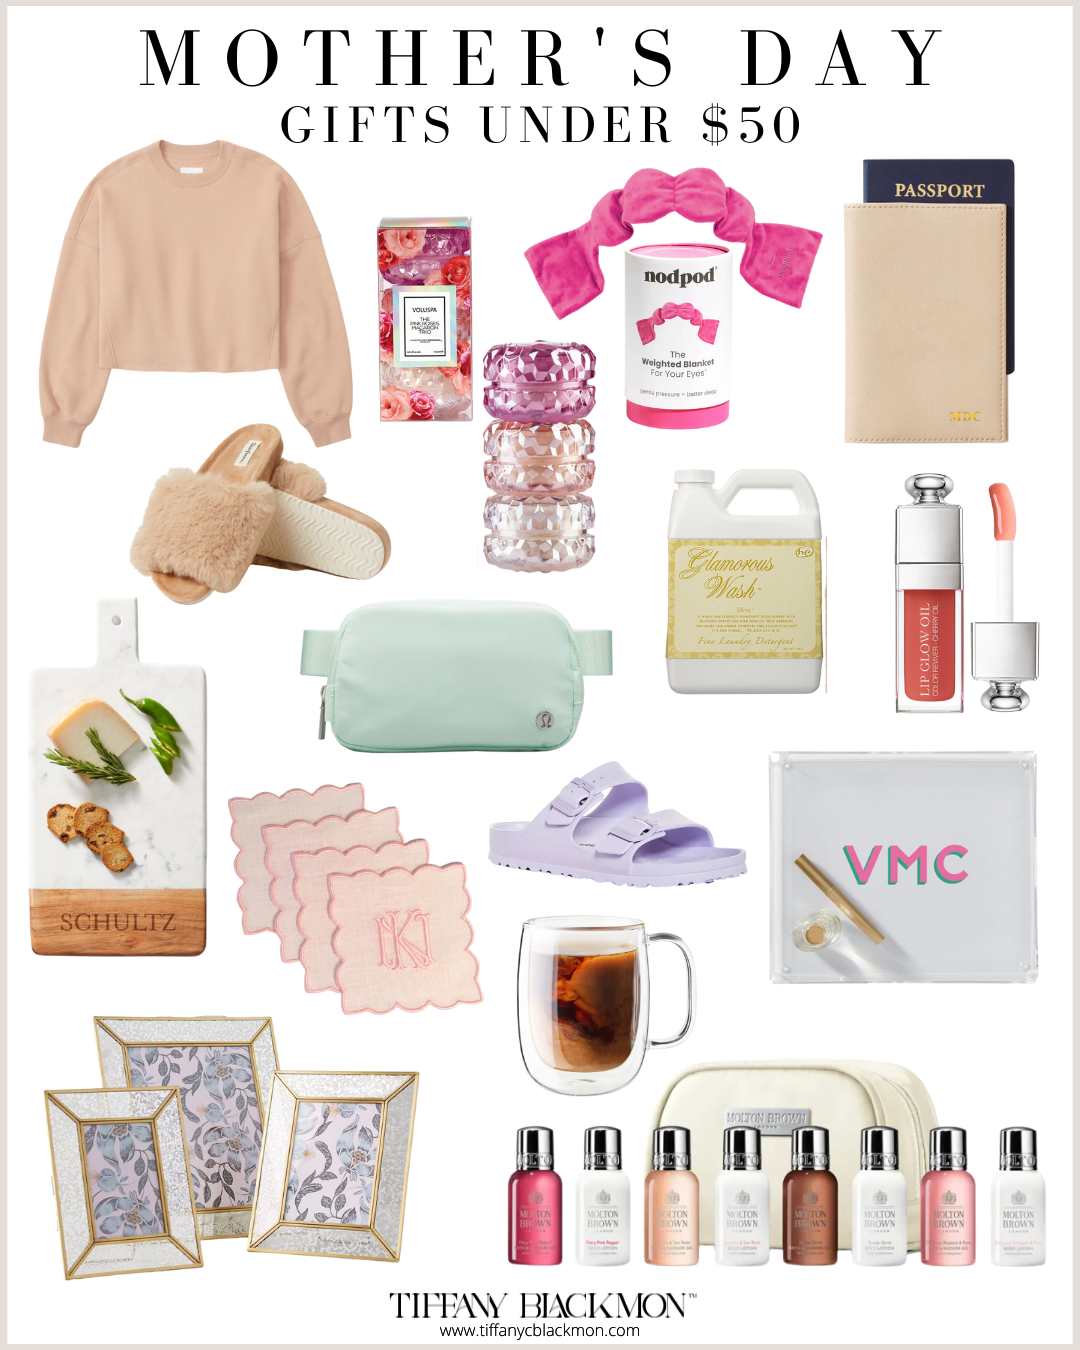 Mother's Day Gift Guide
#mother'sday #giftguide #giftsforher #giftsformom #luxury #giftsunder50 #giftsunder100 #luxurygifts #beauty #fashion #makeup 